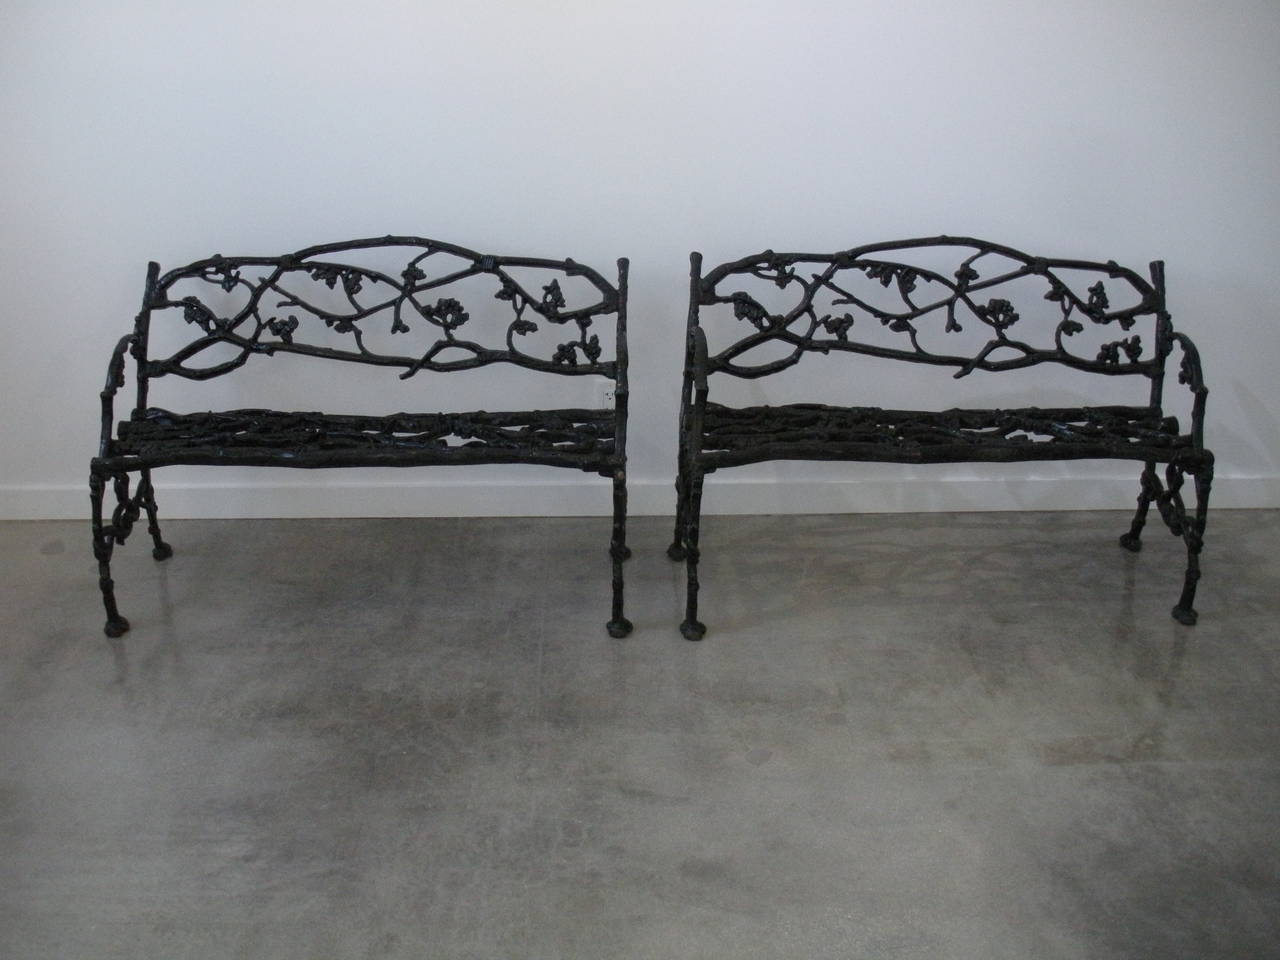 Pair of 19th Century Faux-Bois Cast-Iron Garden Benches:  Janes Beebe 1